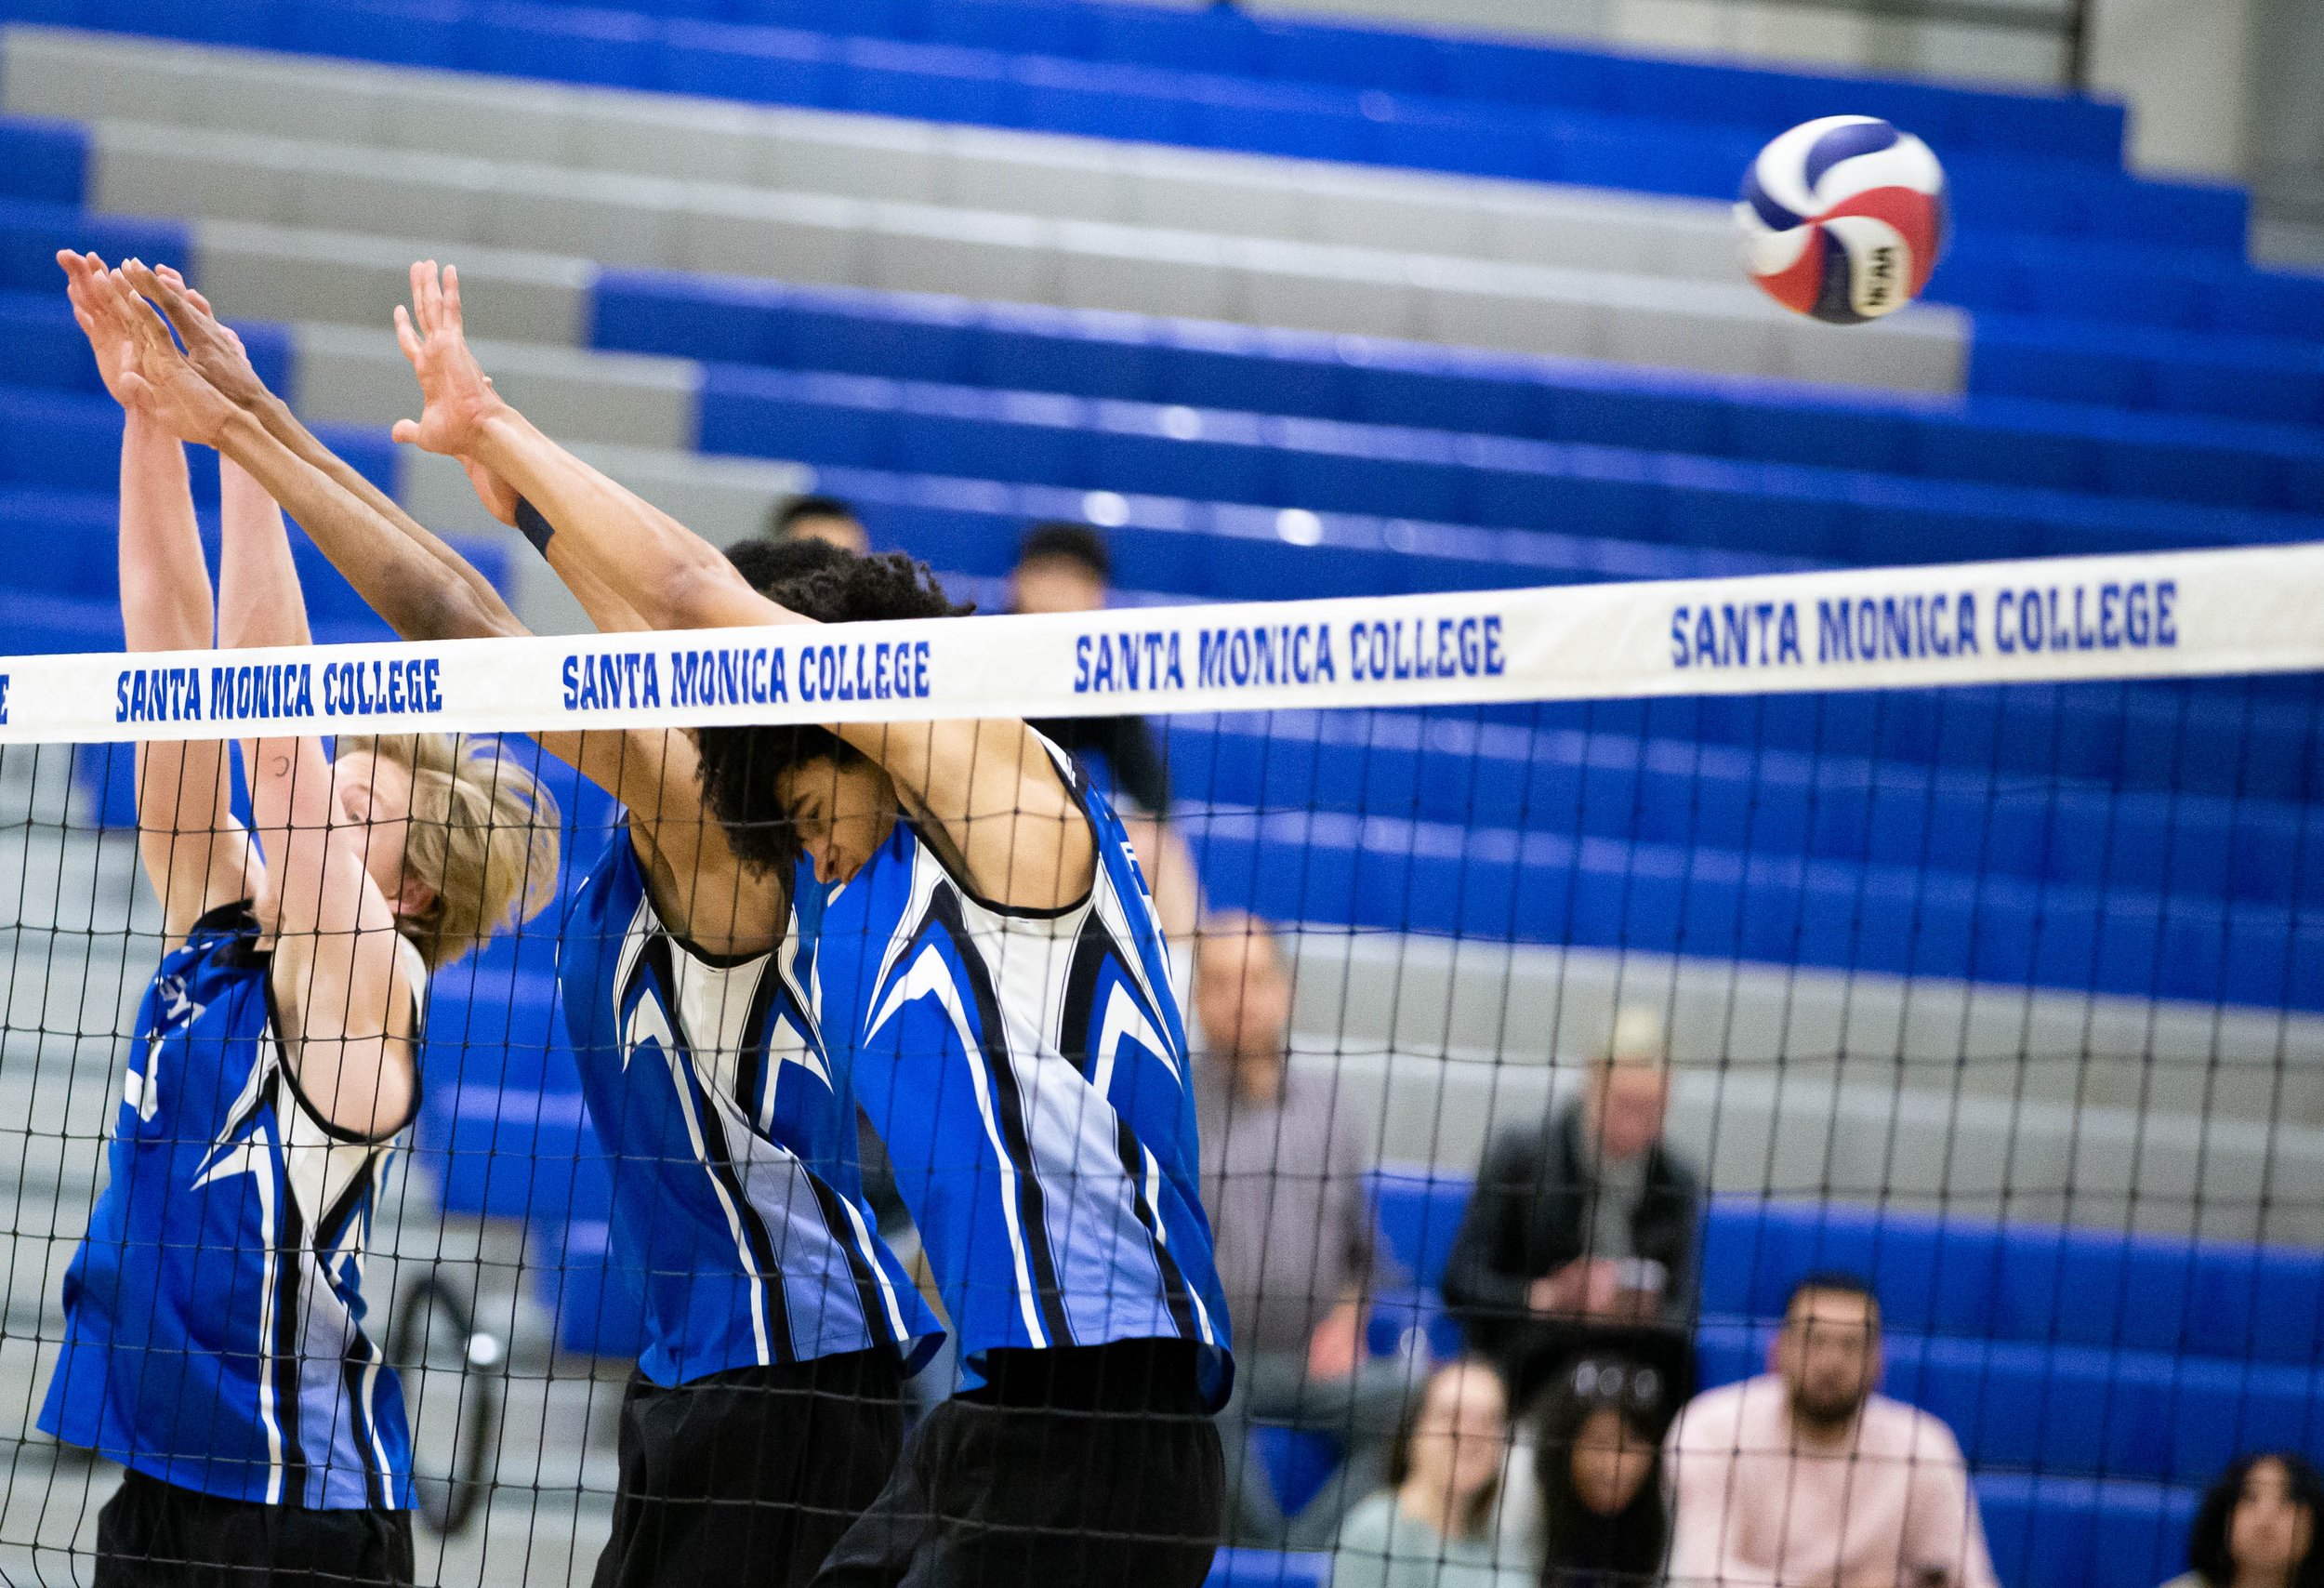  Santa Monica College(SMC) Corsairs Camden Higbee(L) , Beikwaw Yankey(M) and Nate Davis(R) unable to block the ball hit by the opposing team L.A. Pierce College Brahma Bulls on Wed. March 15, 2023 in the SMC Pavillion at Santa Monica, Calif. (Danilo 